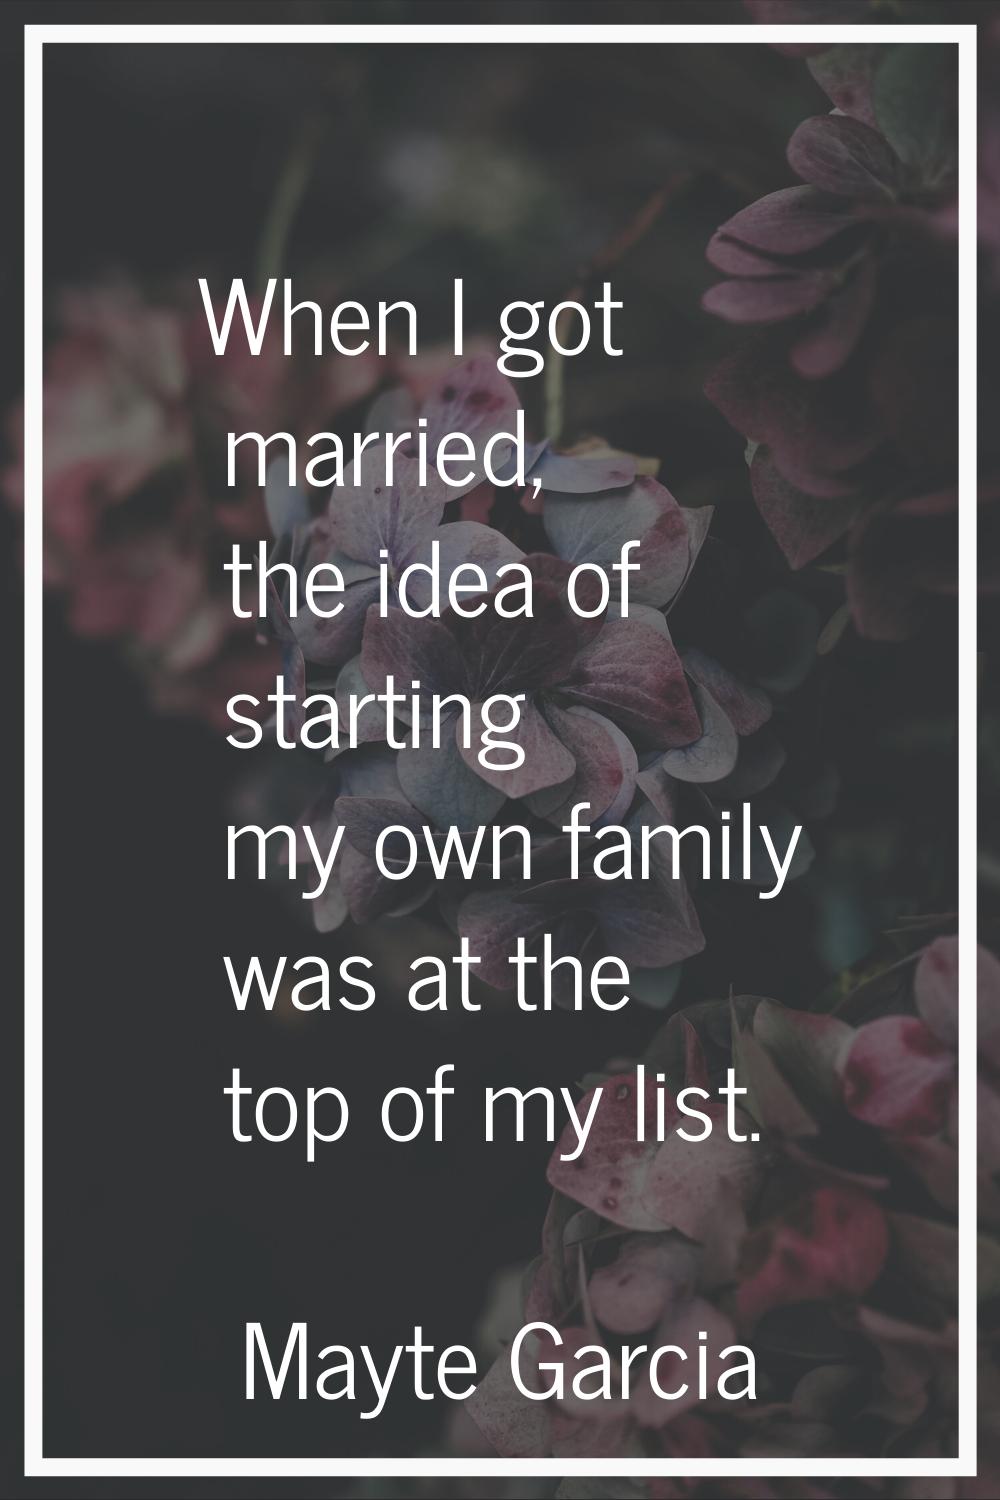 When I got married, the idea of starting my own family was at the top of my list.